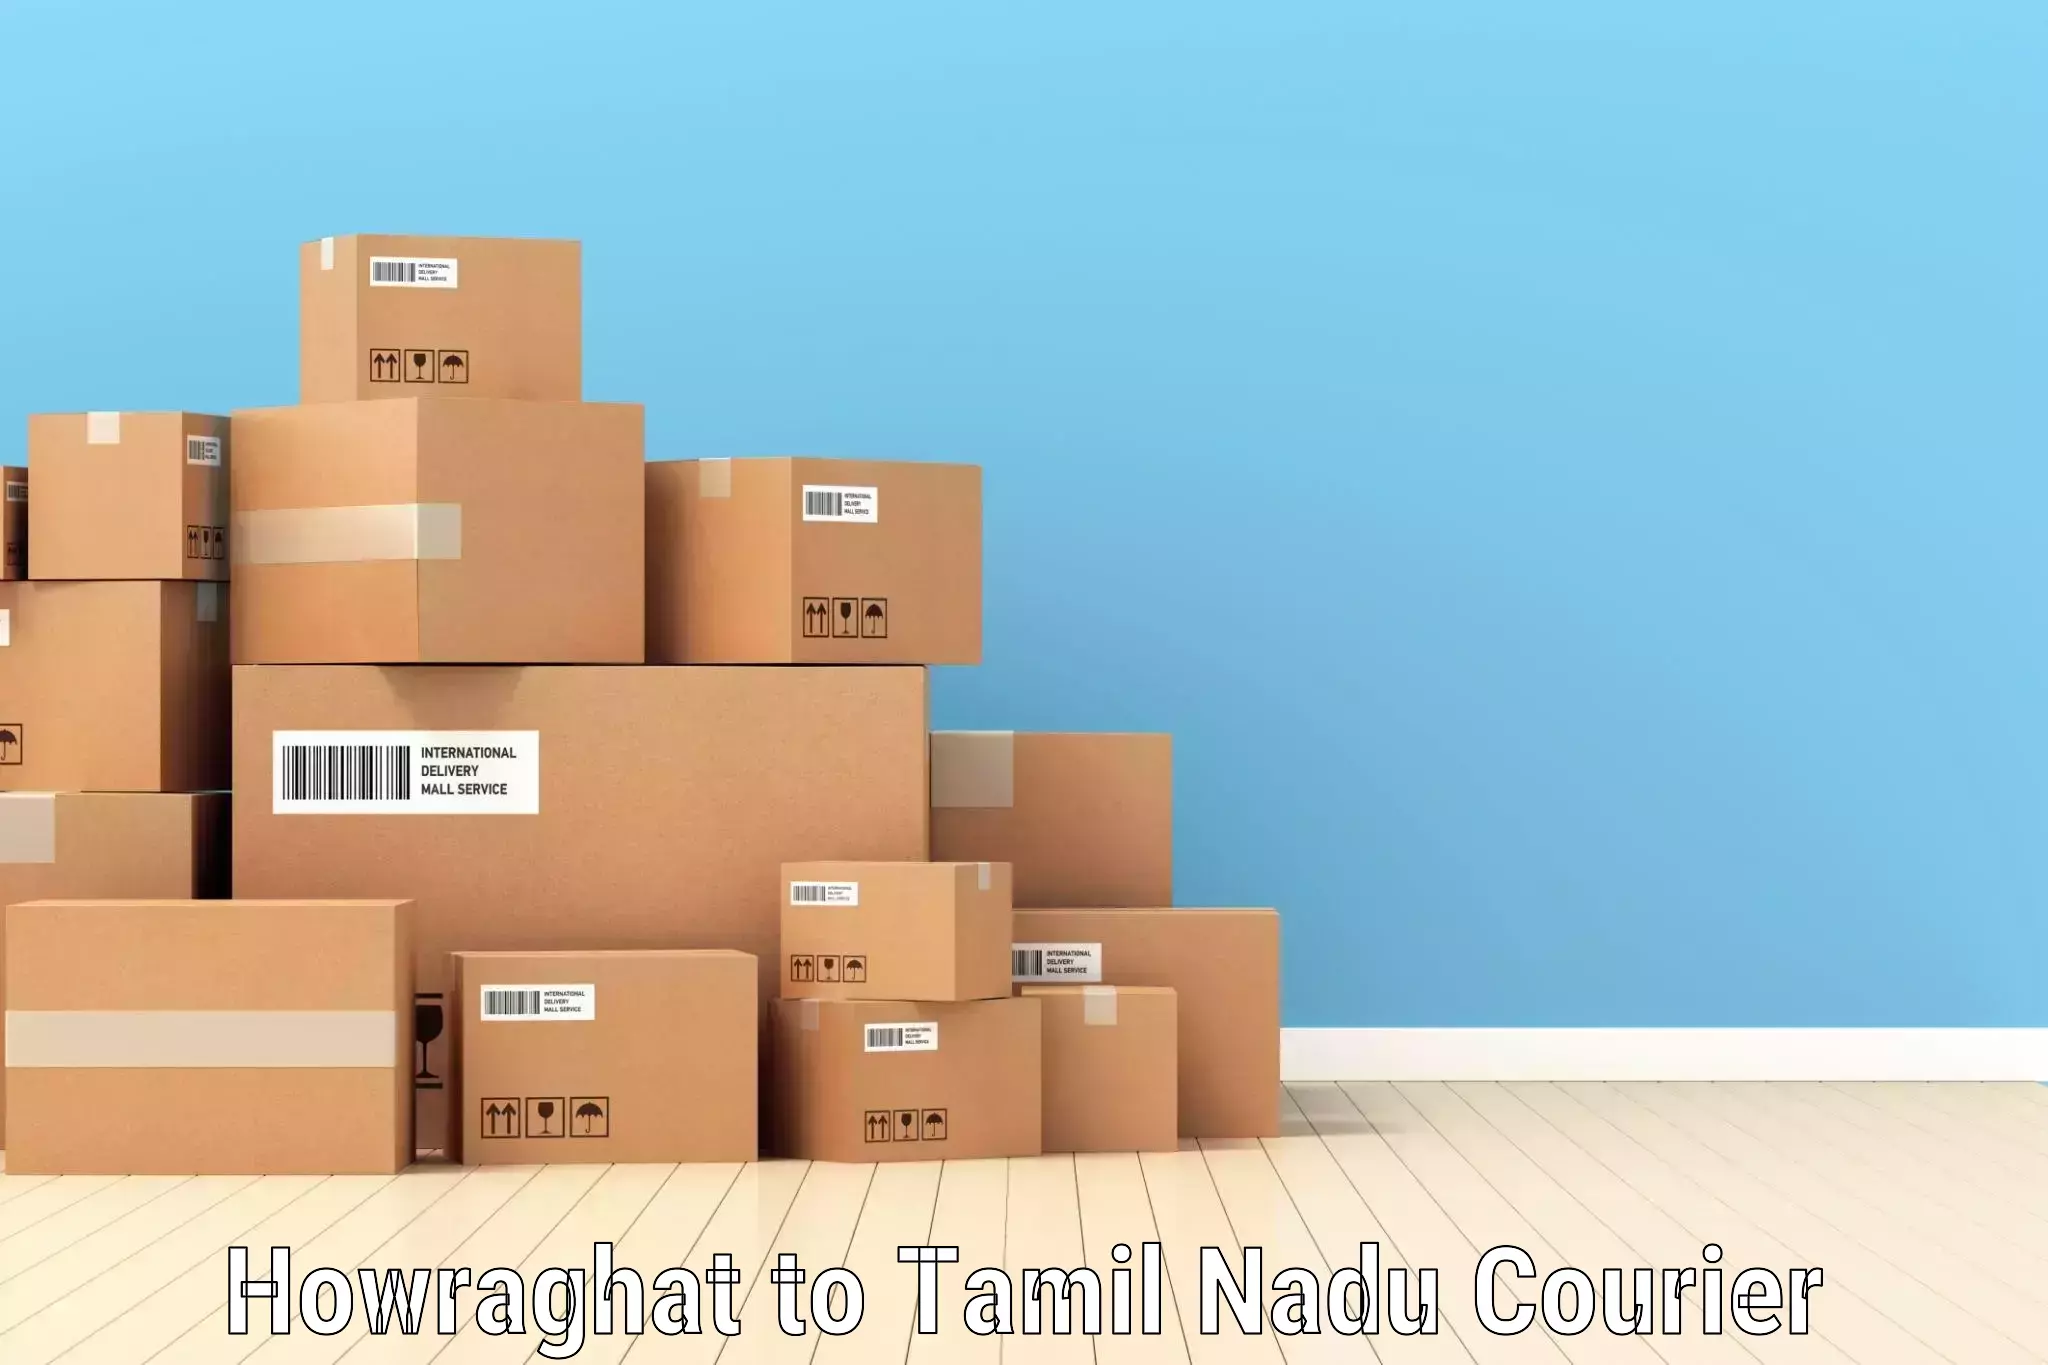 Comprehensive delivery network Howraghat to Namakkal